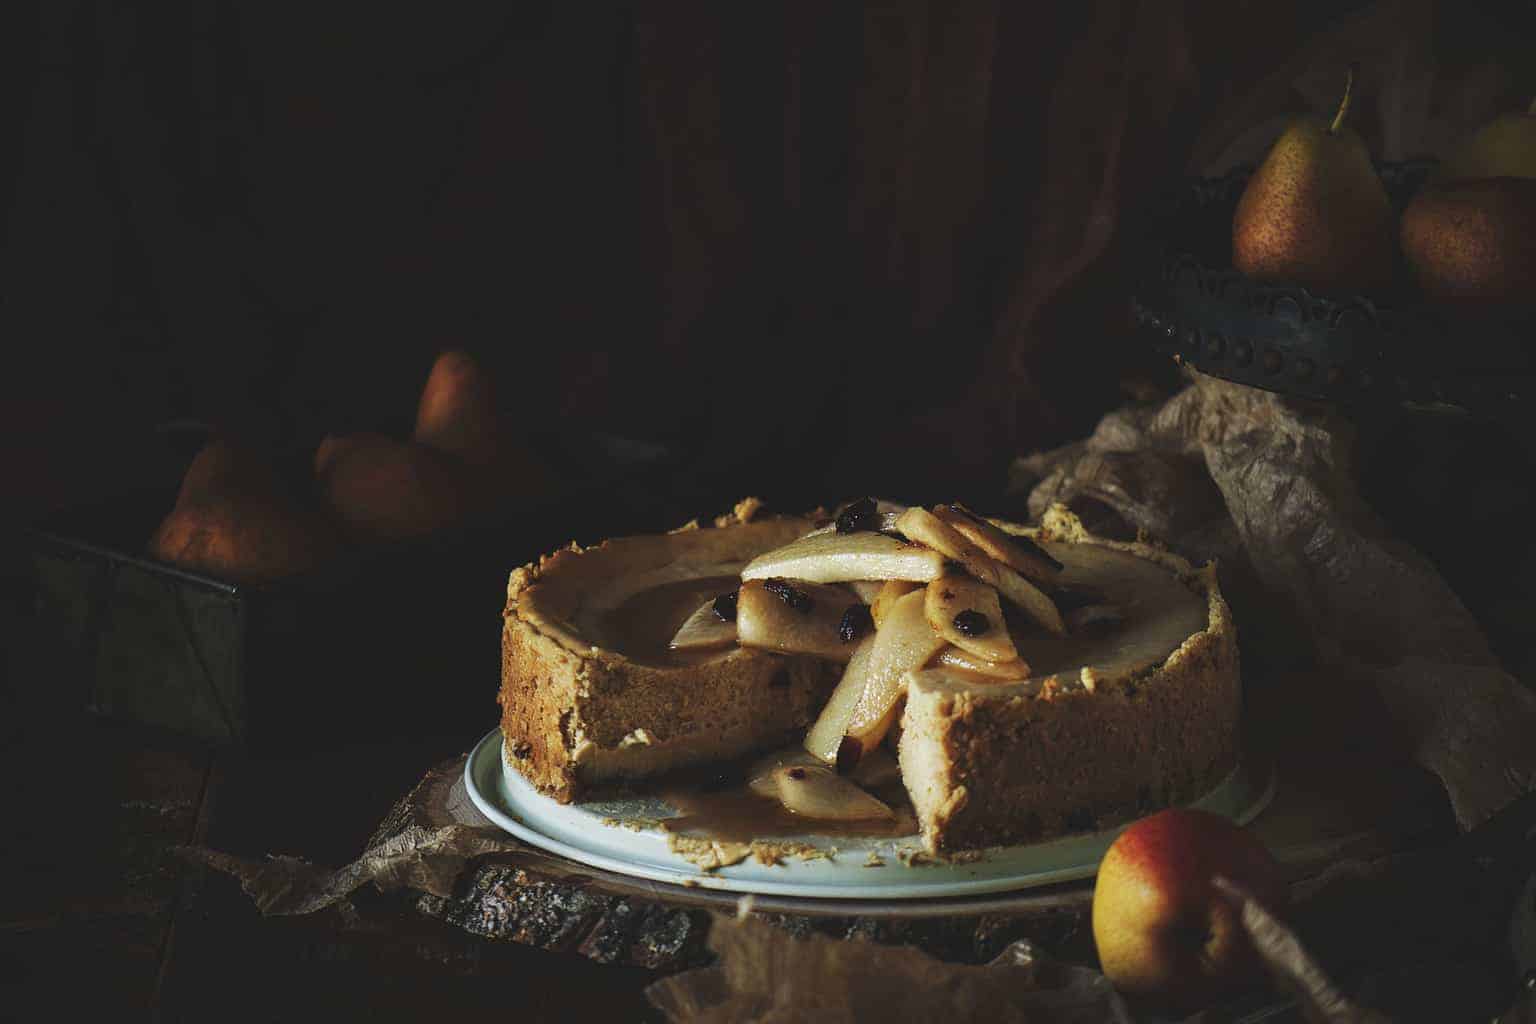 Maple Cheesecake with Cinnamon Pear Topping | Kita Roberts PassTheSushi.com